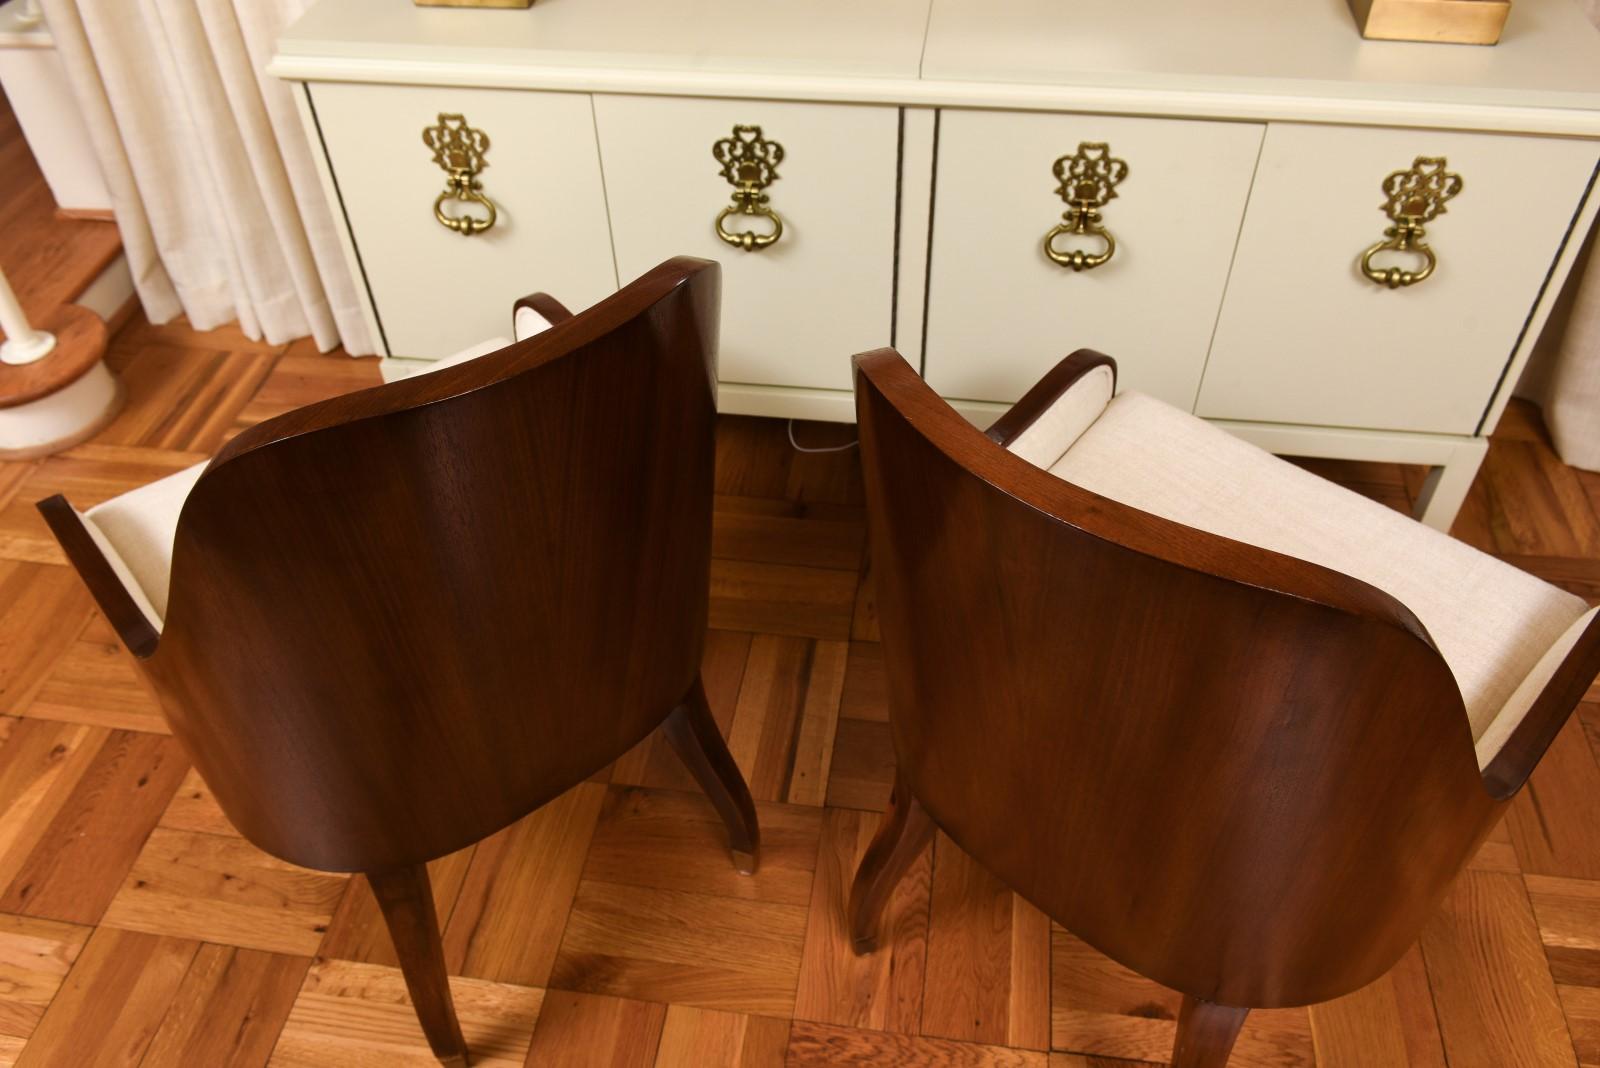 Spectacular Set of 10 Art Deco Revival Chairs in Bookmatch Figured Walnut For Sale 9